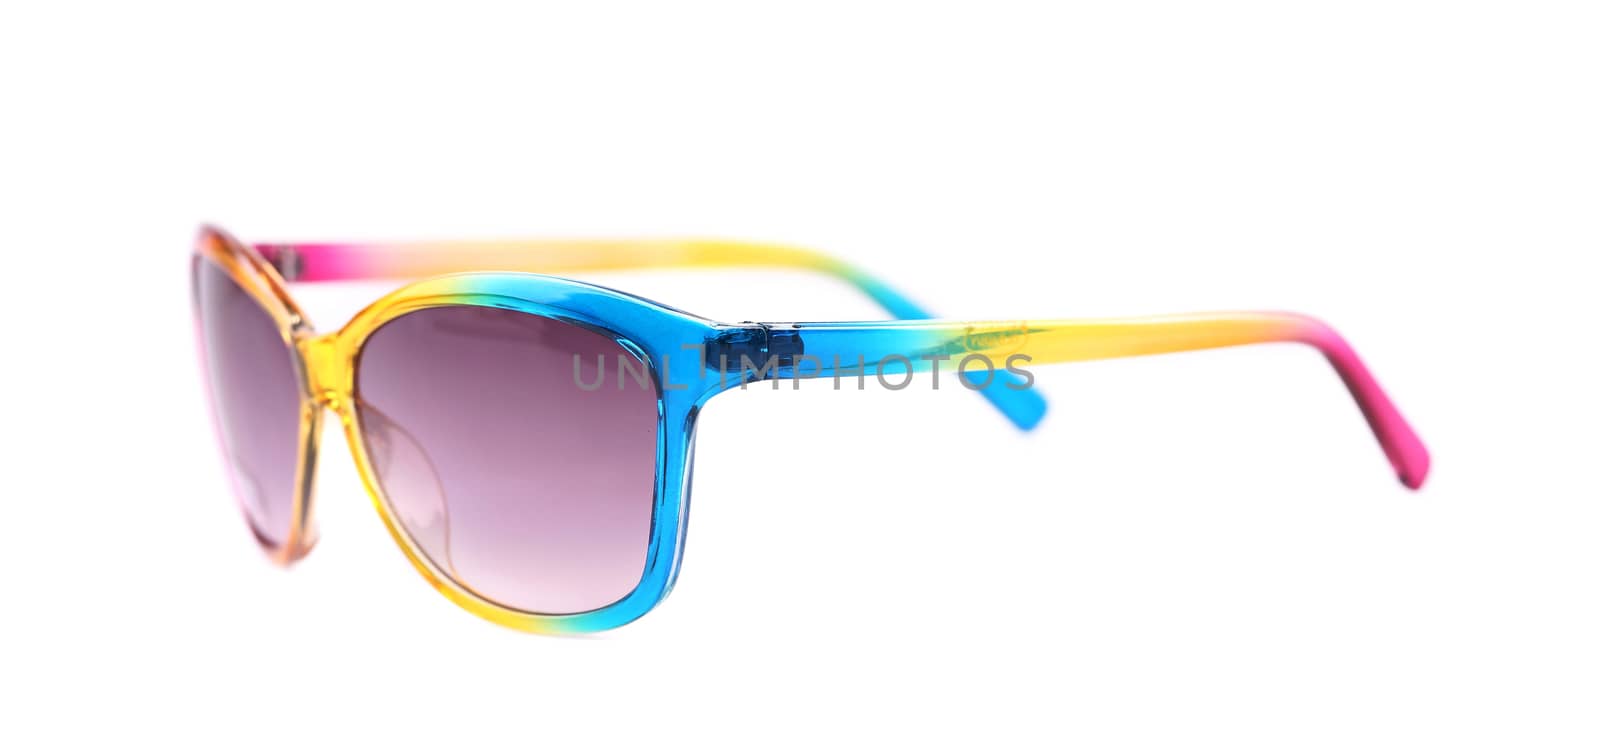 Colorful sun glasses. Isolated on a white background.